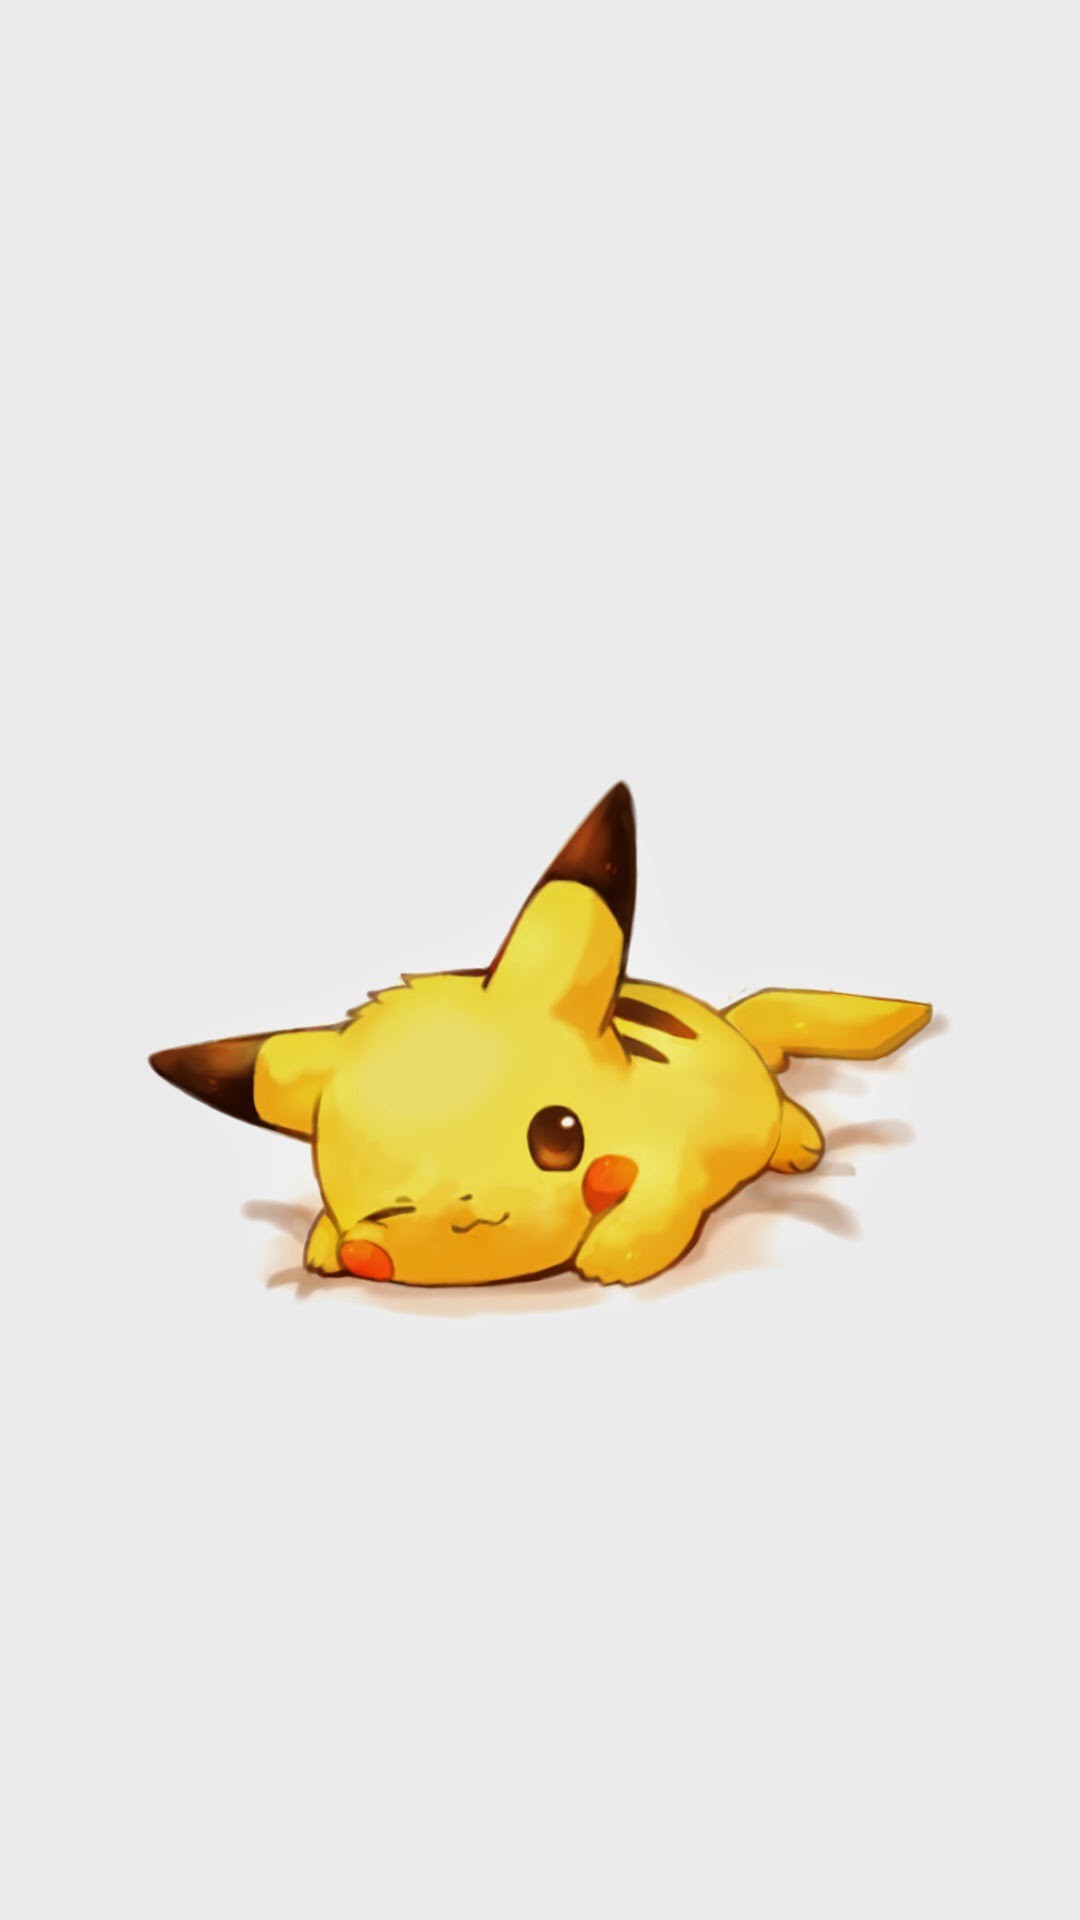 1080x1920 Tap-image-for-more-funny-cute-Pikachu-Pikachu-mobile-for-iPhone-s-c- wallpaper-wpt46010735